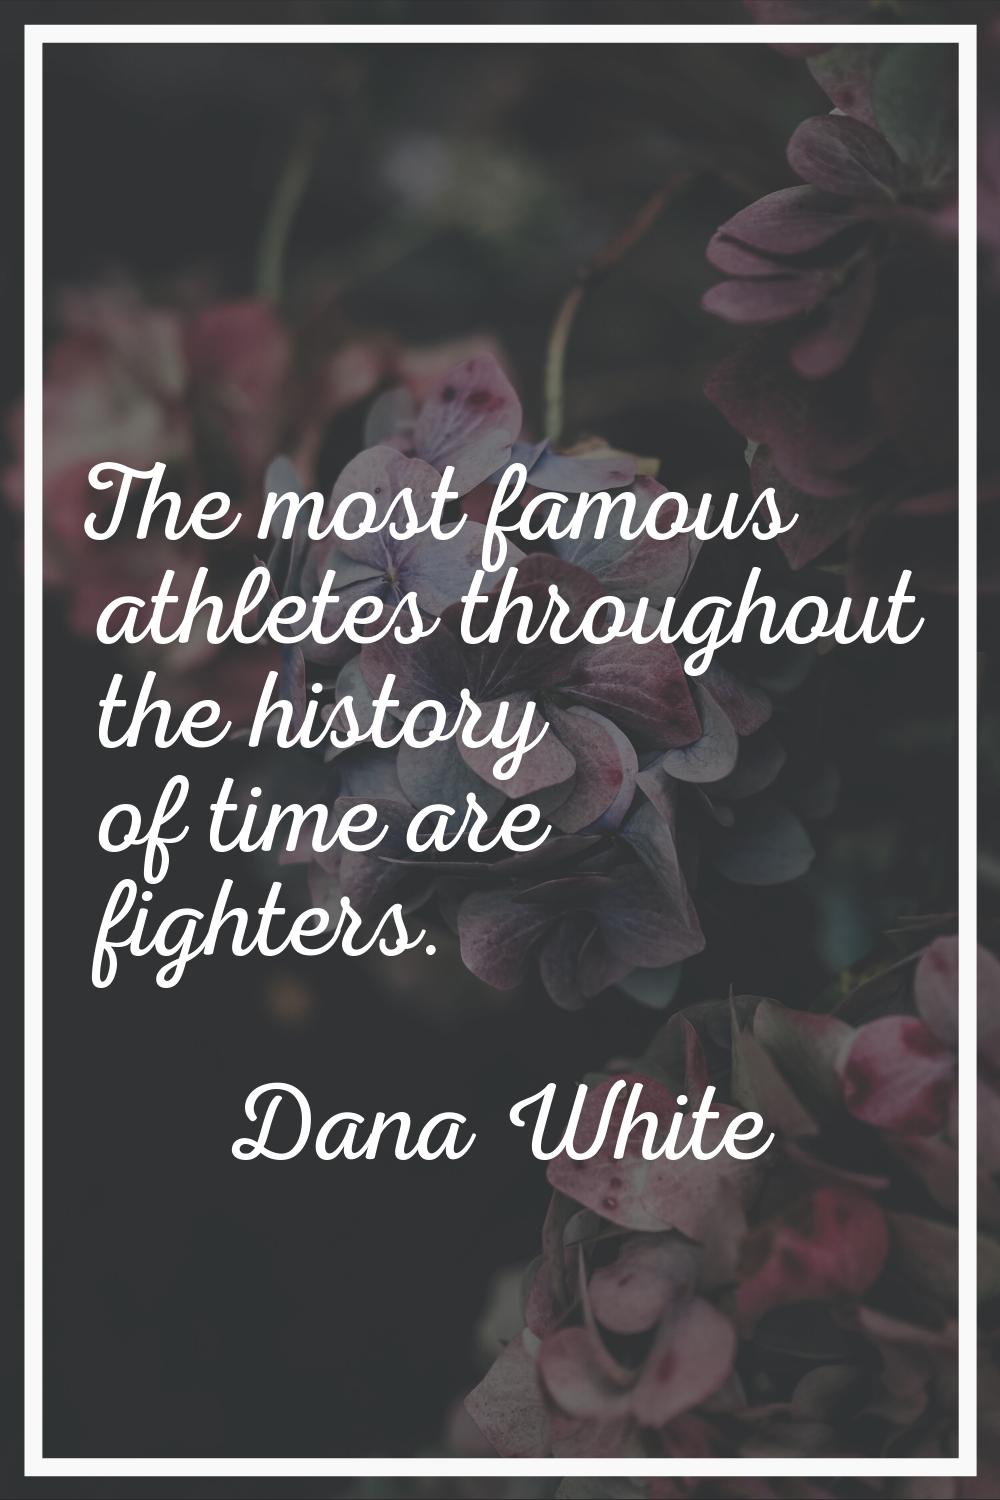 The most famous athletes throughout the history of time are fighters.